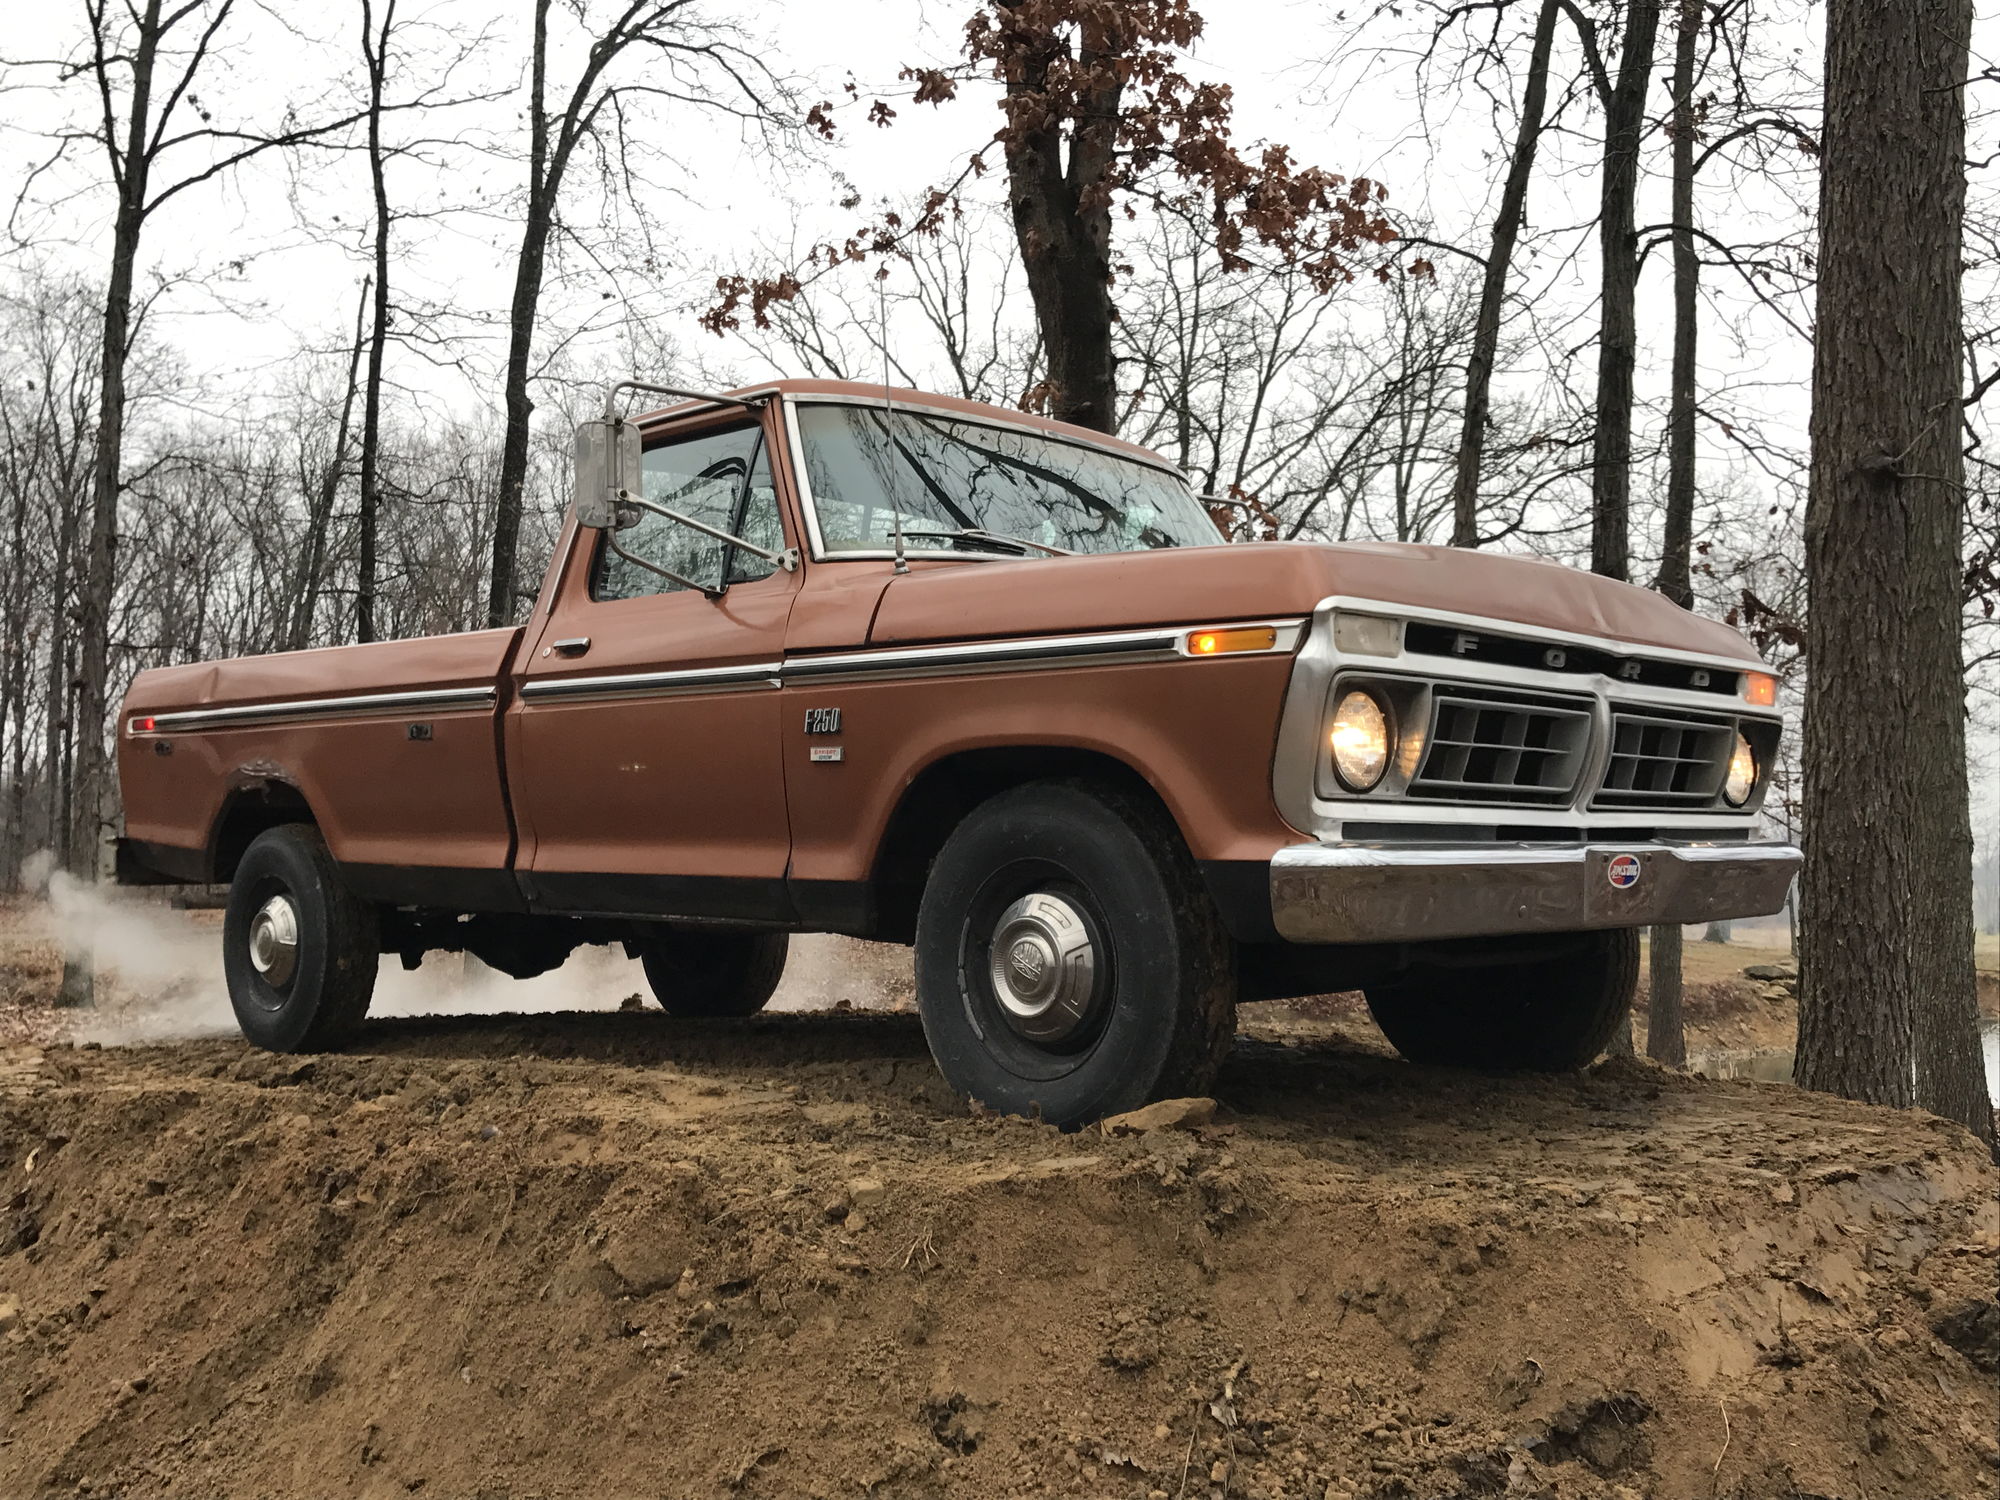 Craigslist find of the week! - Page 137 - Ford Truck ...